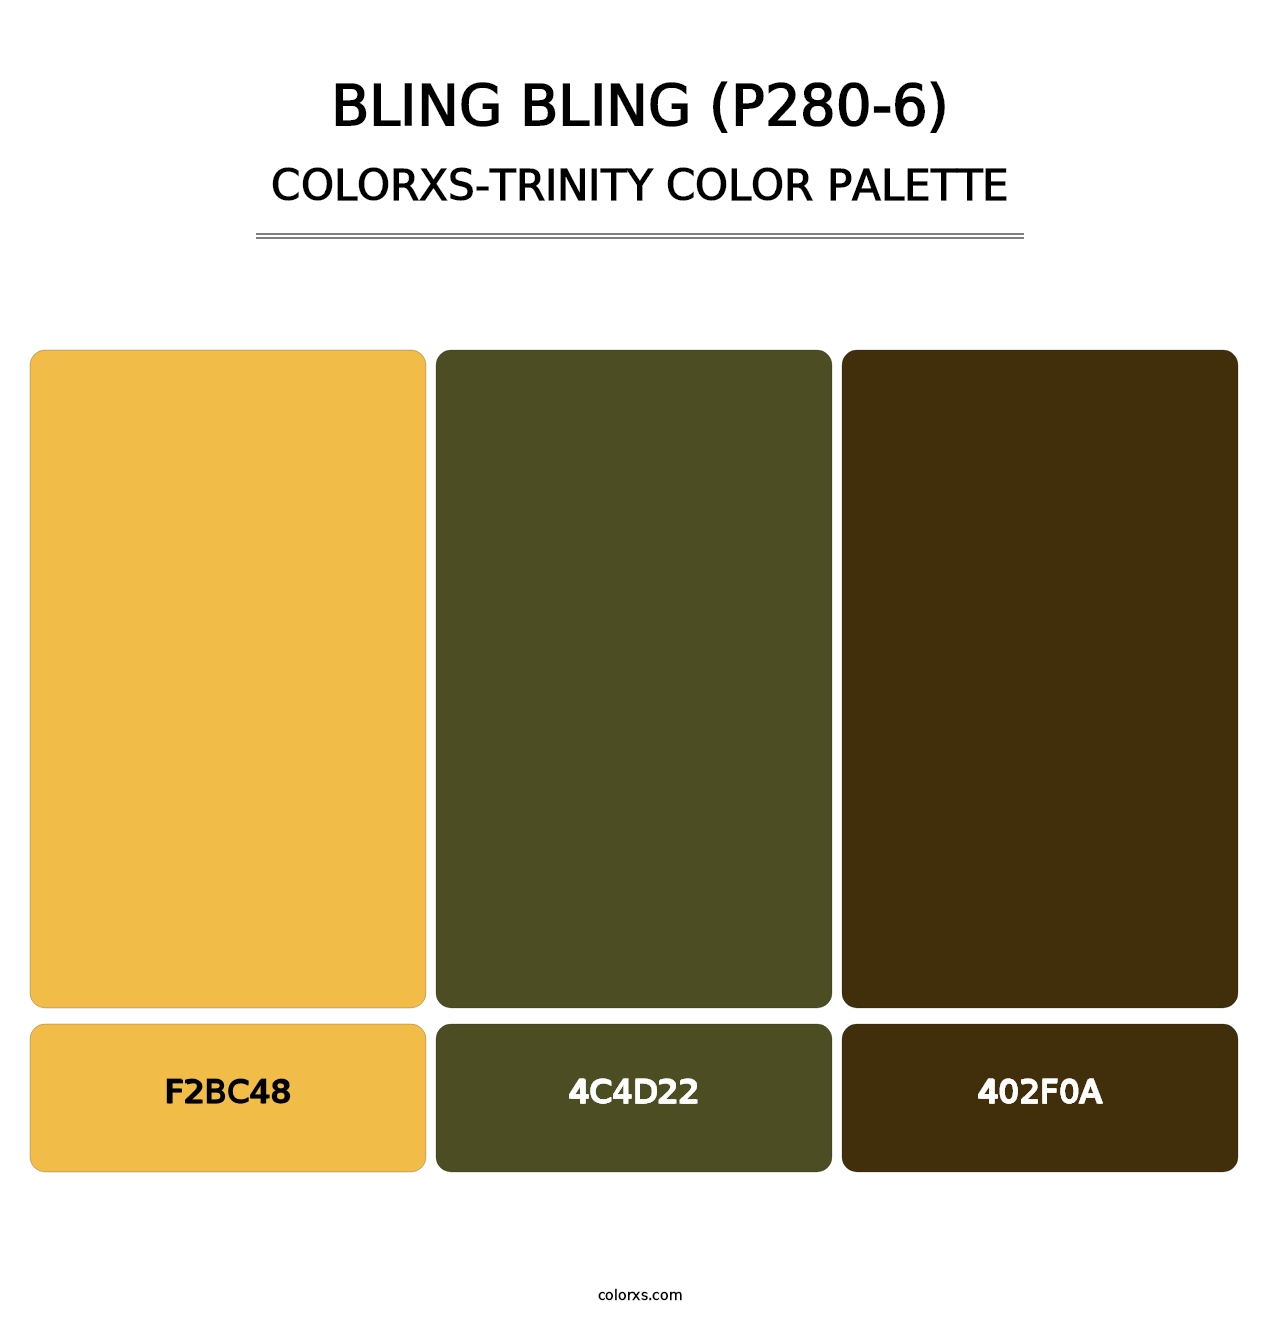 Bling Bling (P280-6) - Colorxs Trinity Palette